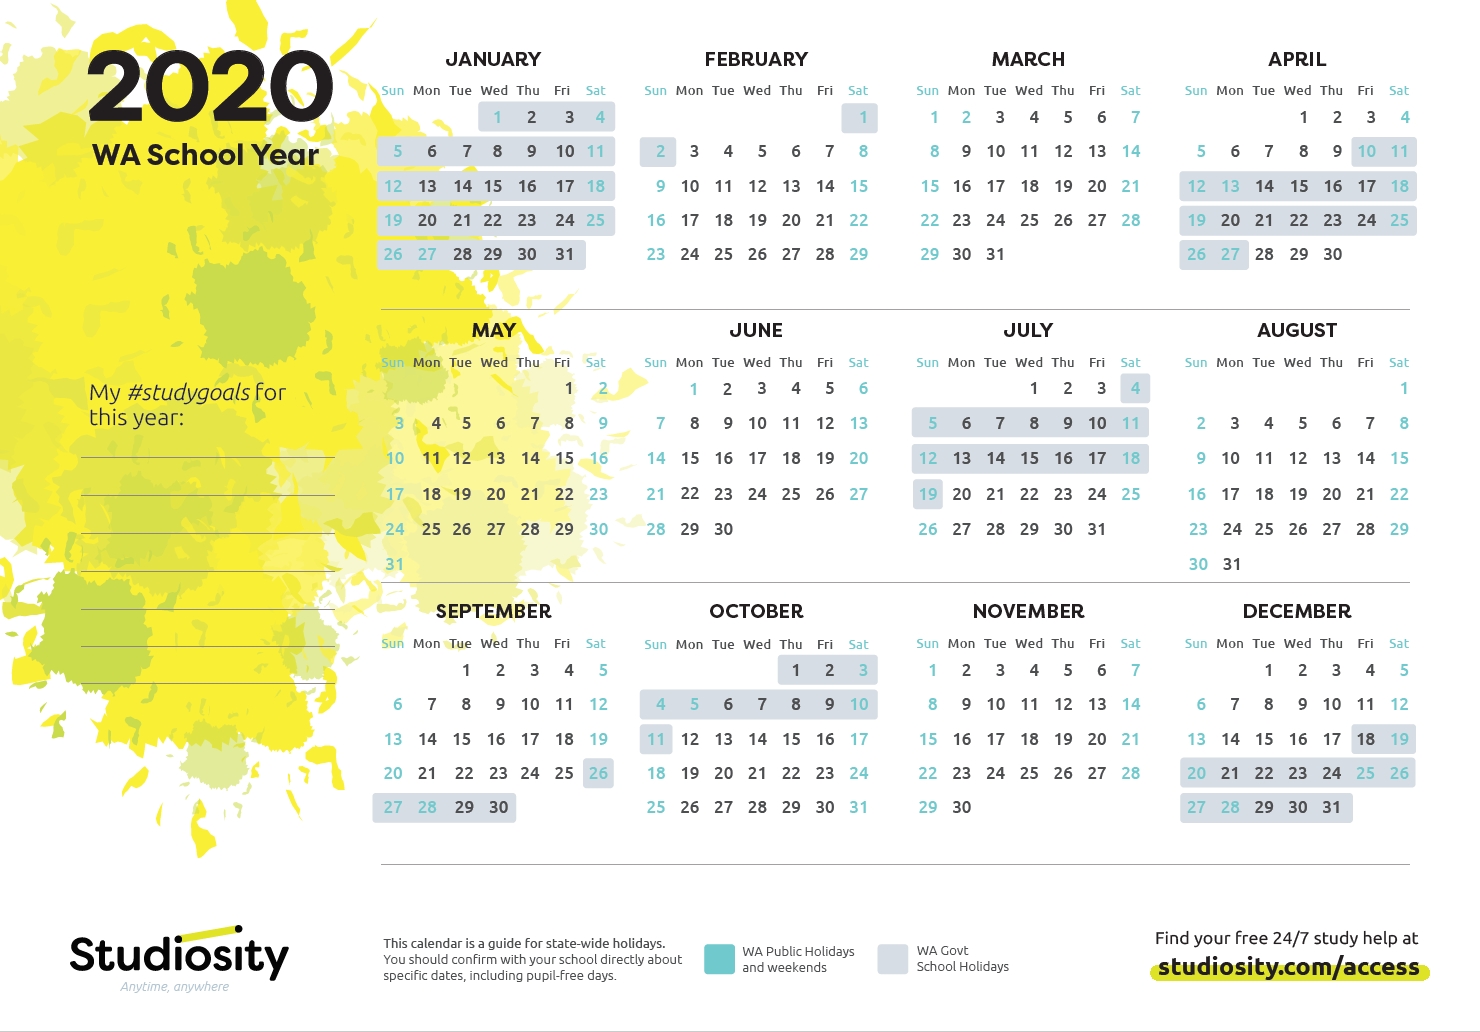 School Terms And Public Holiday Dates For Wa In 2020 Incredible Printable 2020 Calendar School Holidays